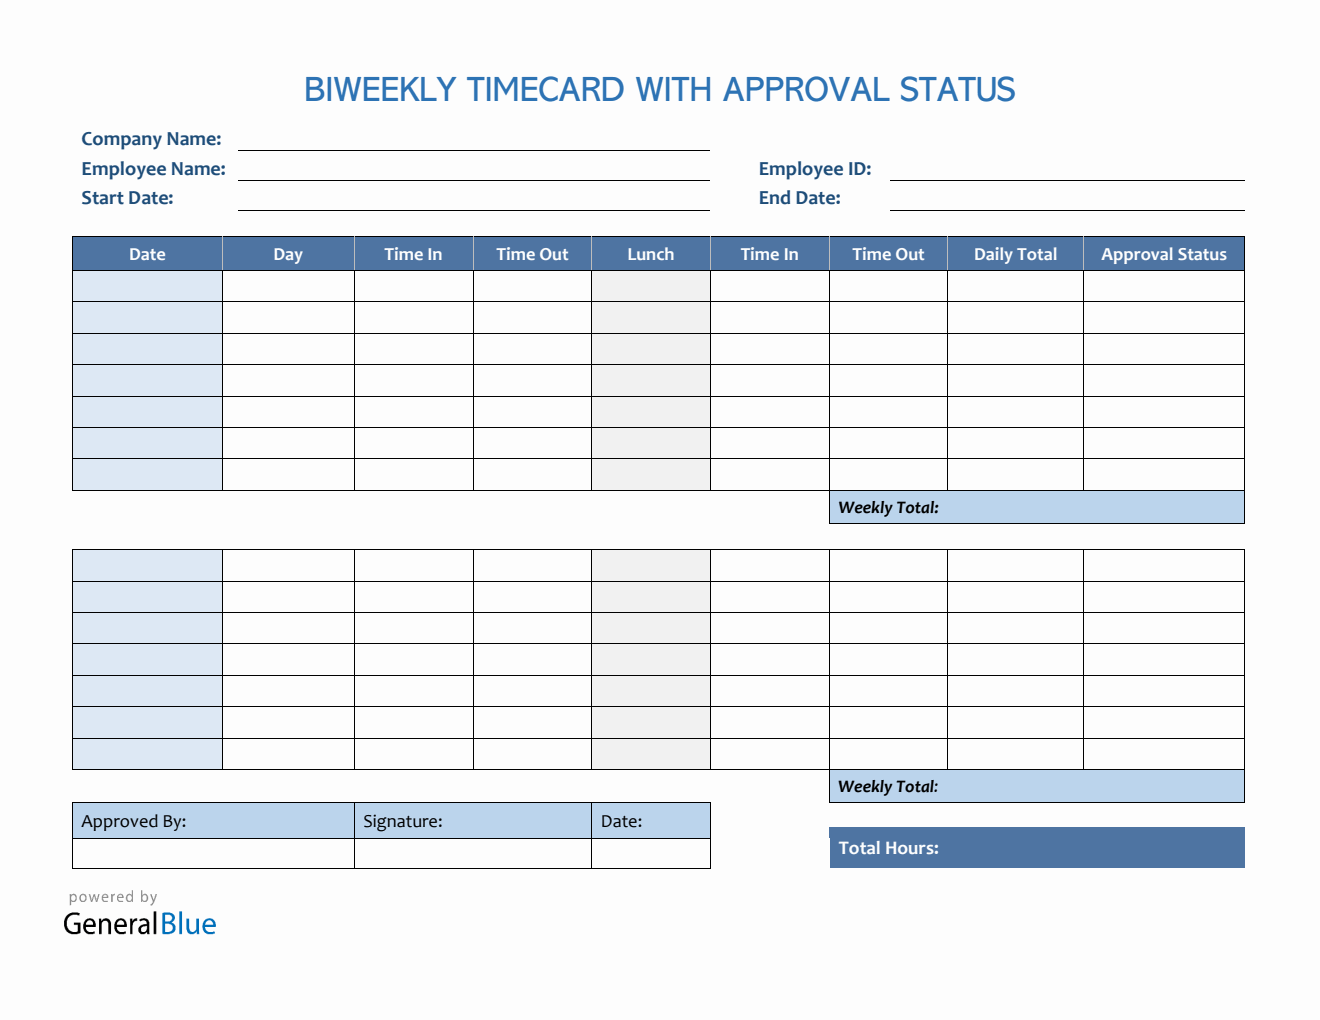 Biweekly Timecard With Approval Status in PDF